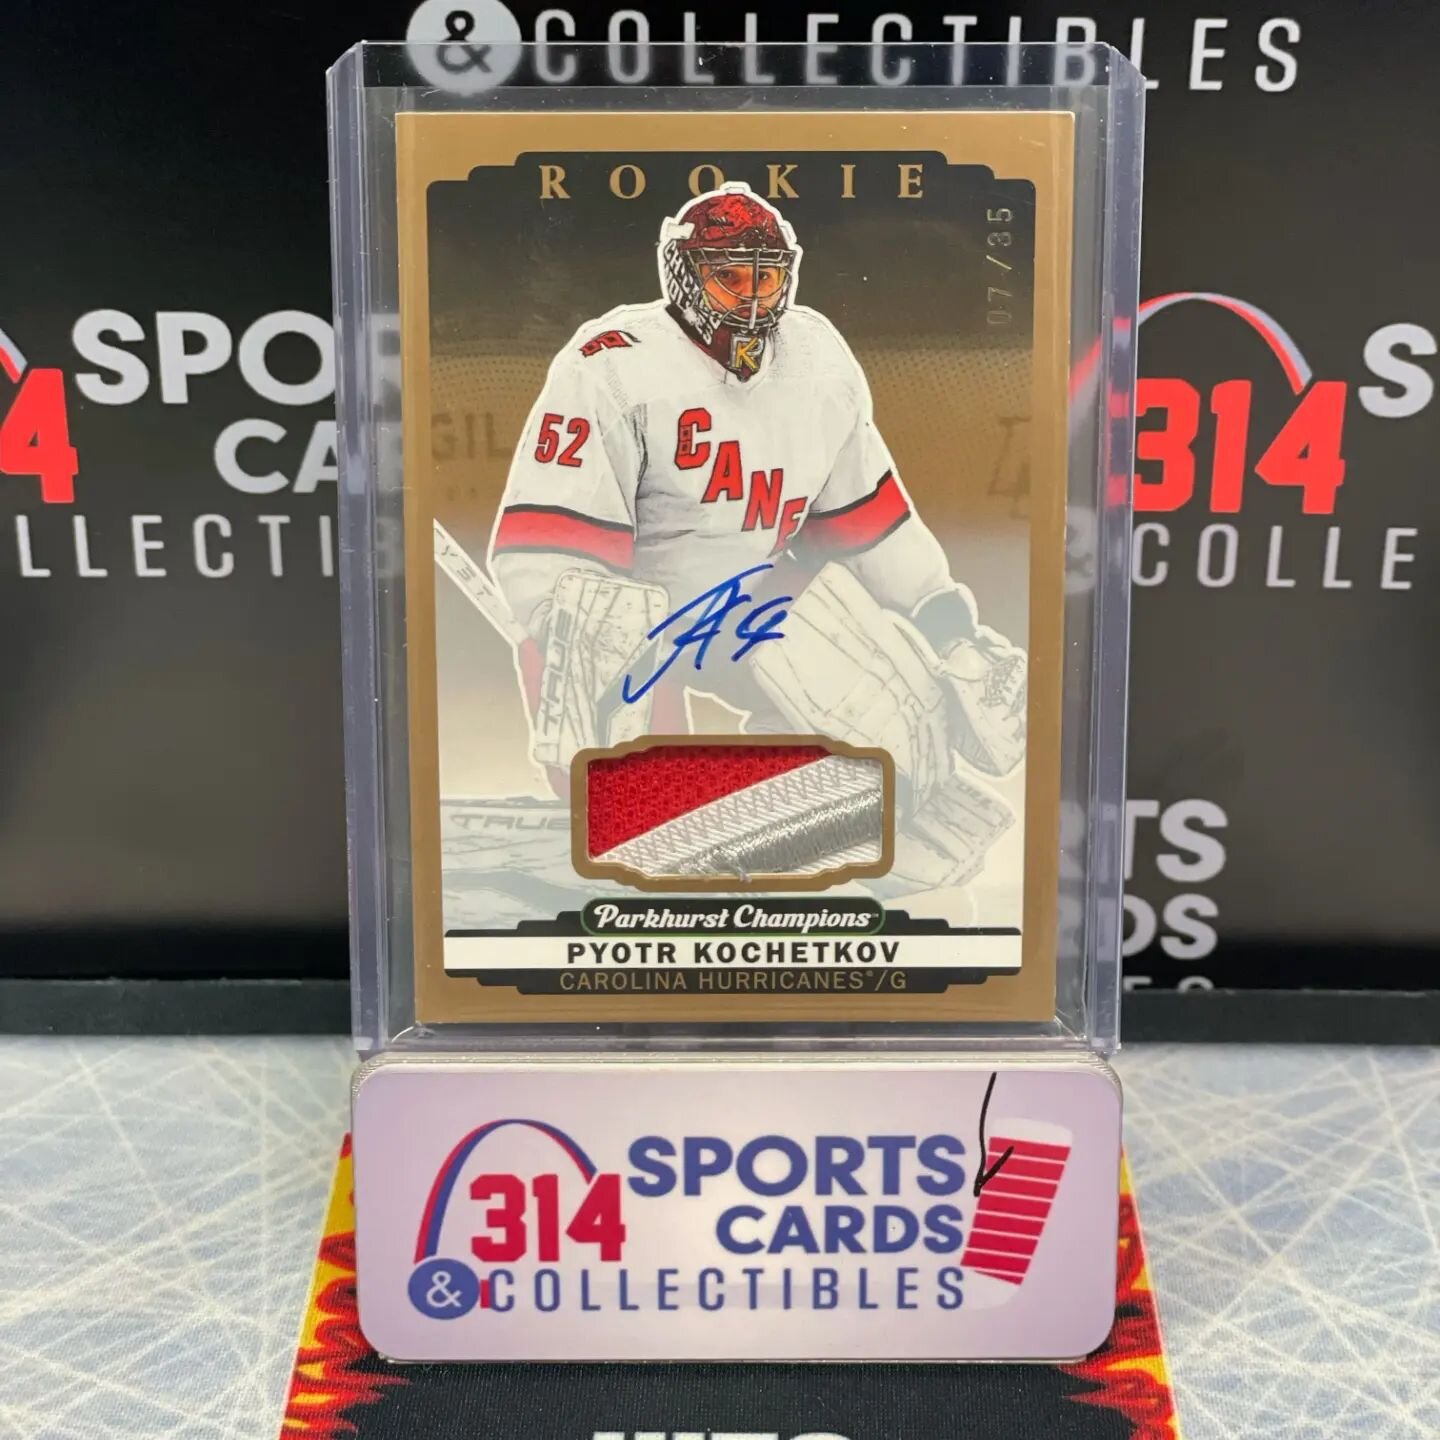 SWIPE TO CHECK OUT ALL THE HITS FROM @upperdecksports PARKHURST

Congratulations to everyone who got a hit! 
Thanks to everyone who supports the breaks!